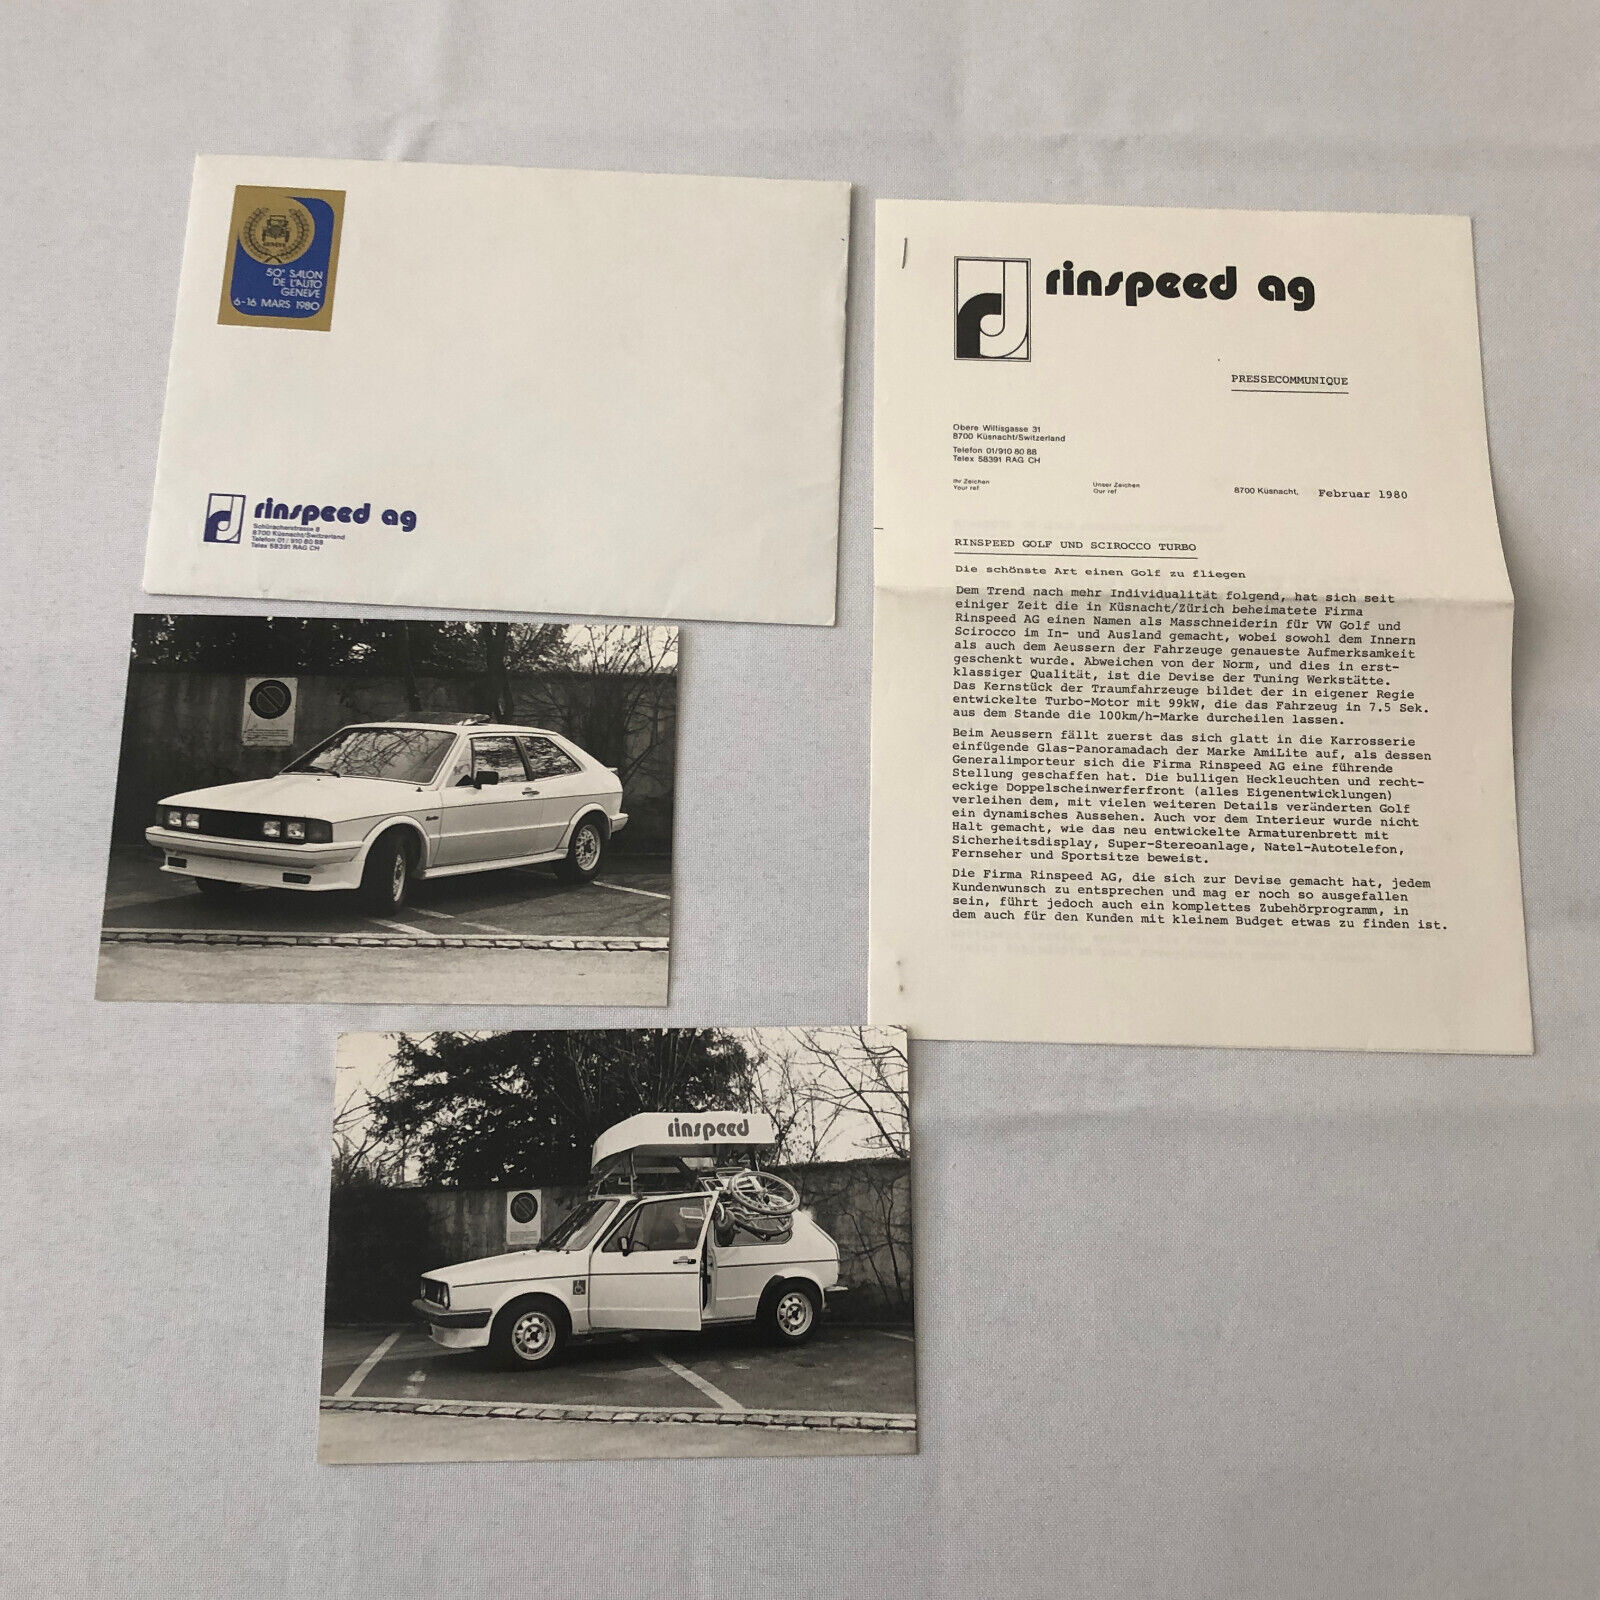 1980 Rinspeed Volkswagen VW Golf and Scirocco Turbo Press Kit with Photos